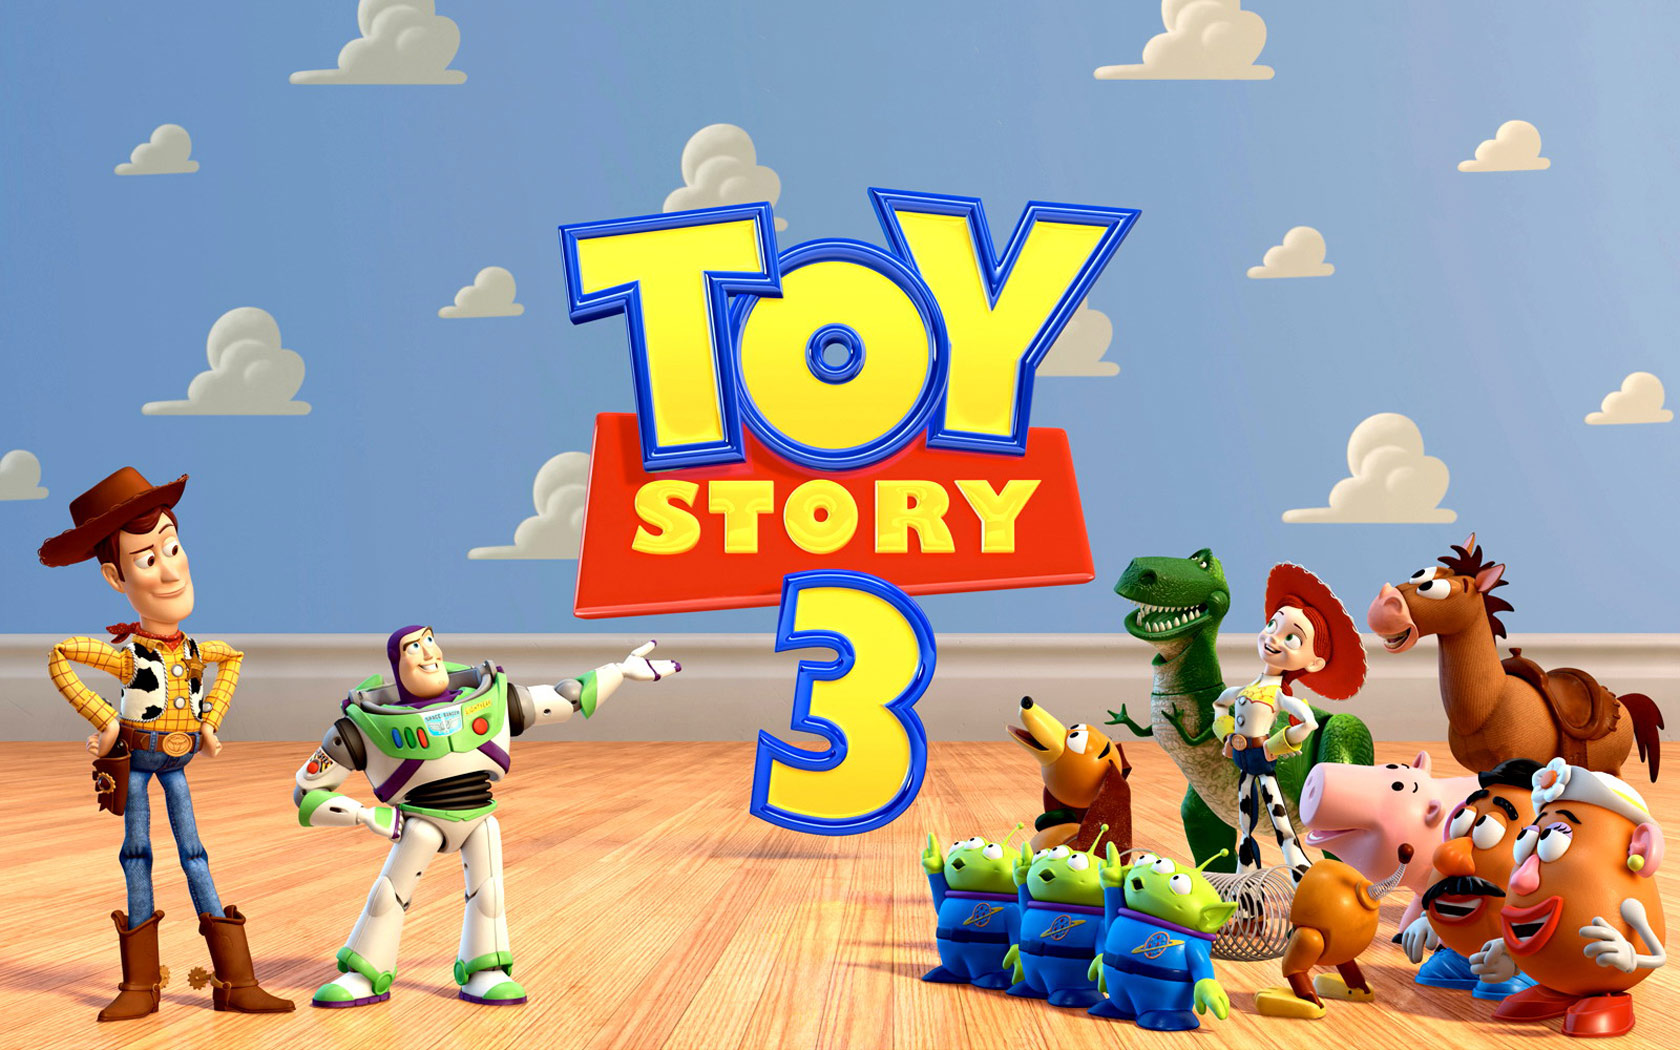 Toy Story 3 Wallpaper - Toy Story 3 Background - HD Wallpaper 